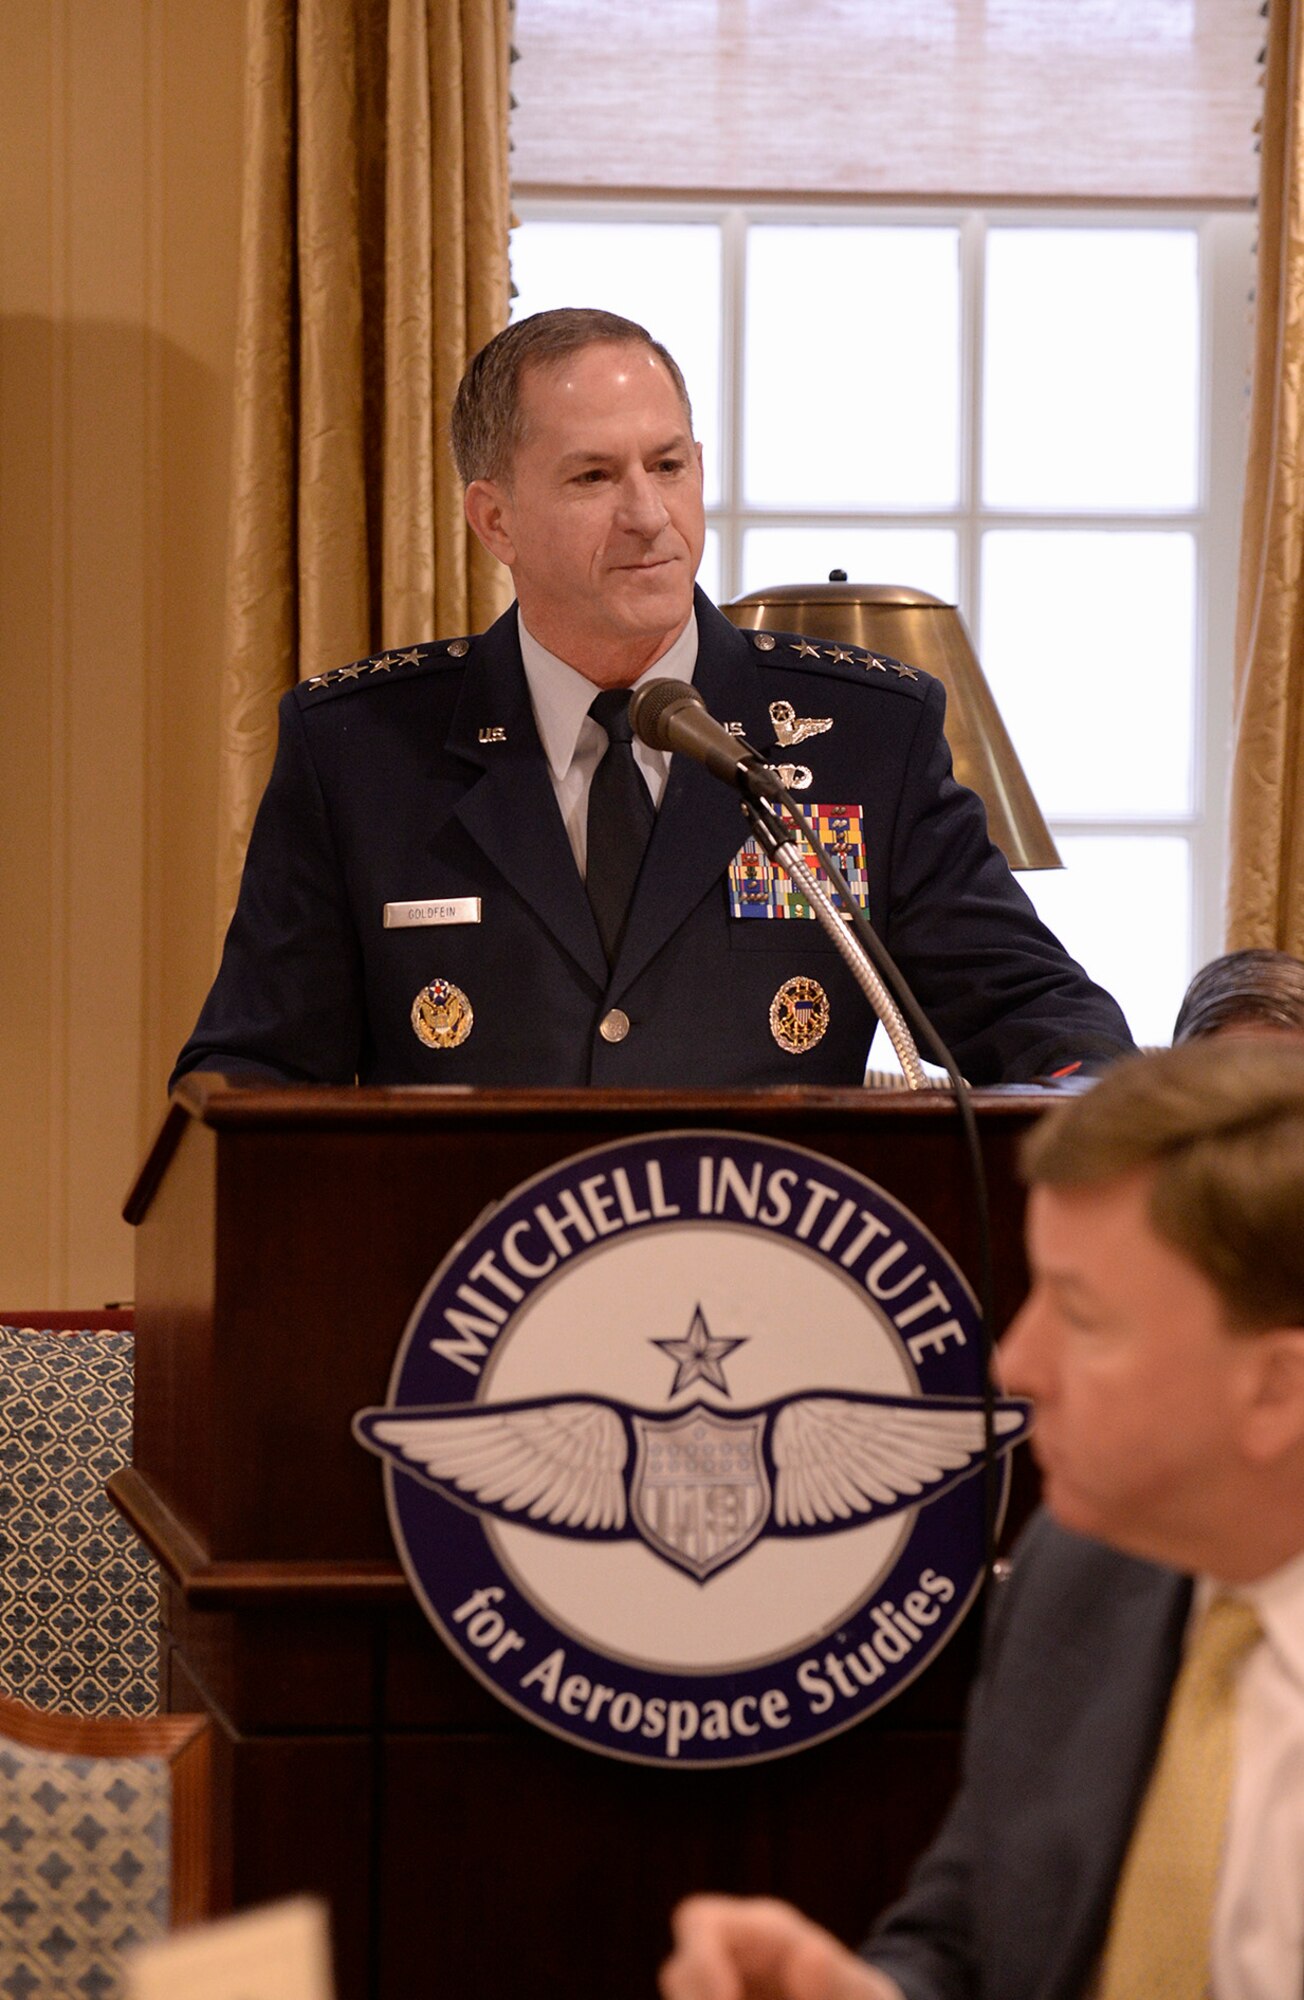 Air Force Chief of Staff Gen. David Goldfein discusses Air Force's Space capabilities and responsibilities at the Mitchell Institute's Space Power Breakfast at the Capitol Hill Club in Washington, D.C., Feb 3, 2017. (U.S. Air Force photo/Andy Morataya)